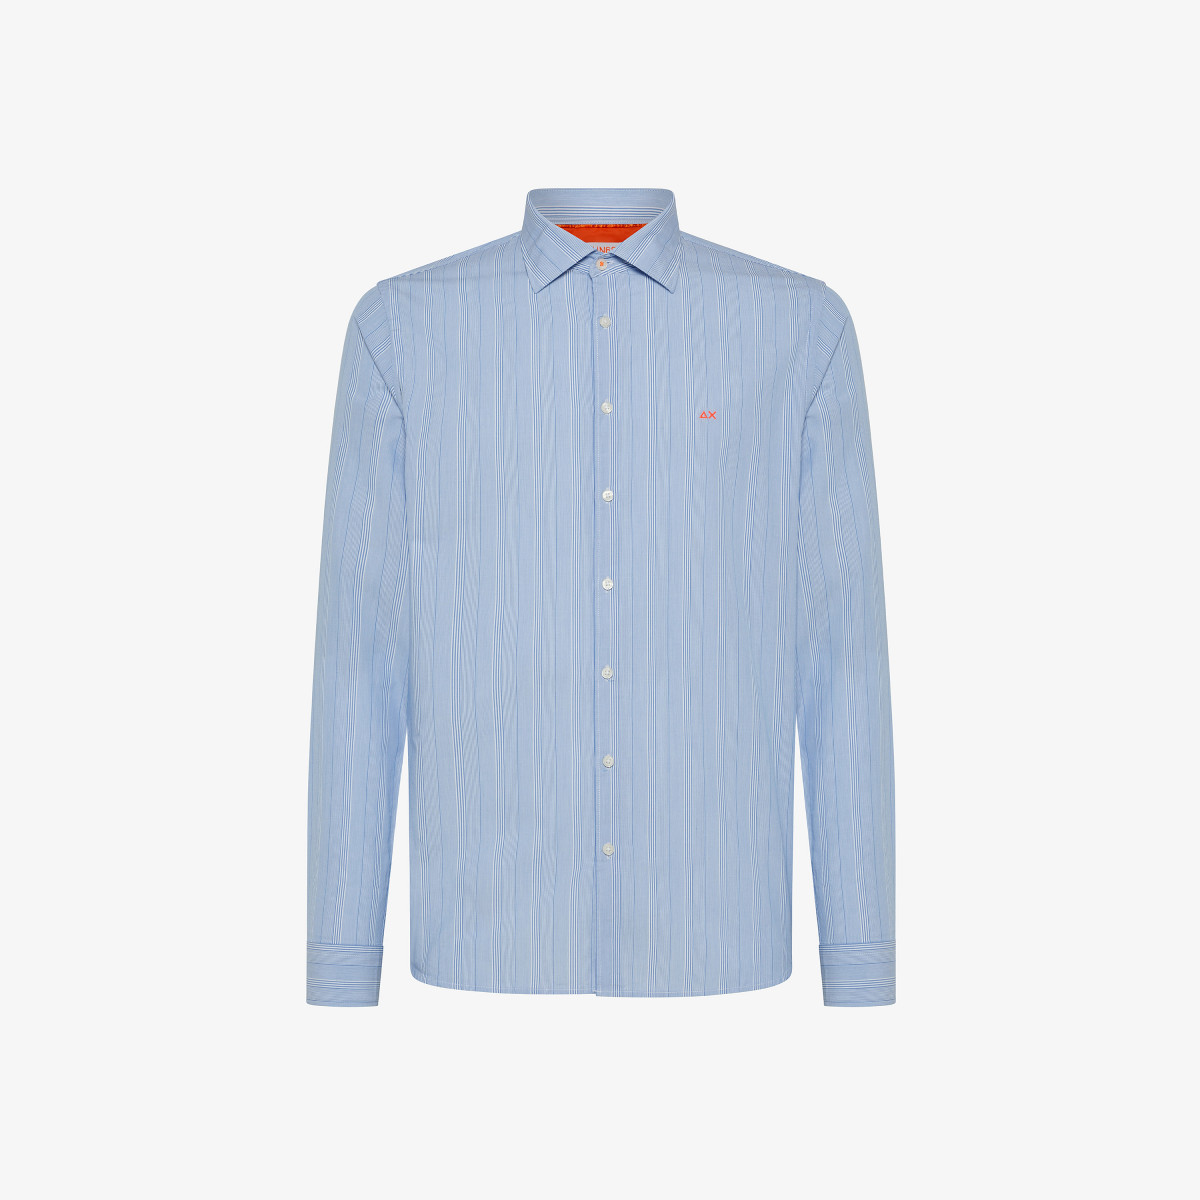 SHIRT CLASSIC STRIPES WITH FLUO DETAIL SKYE BLUE/BIANCO